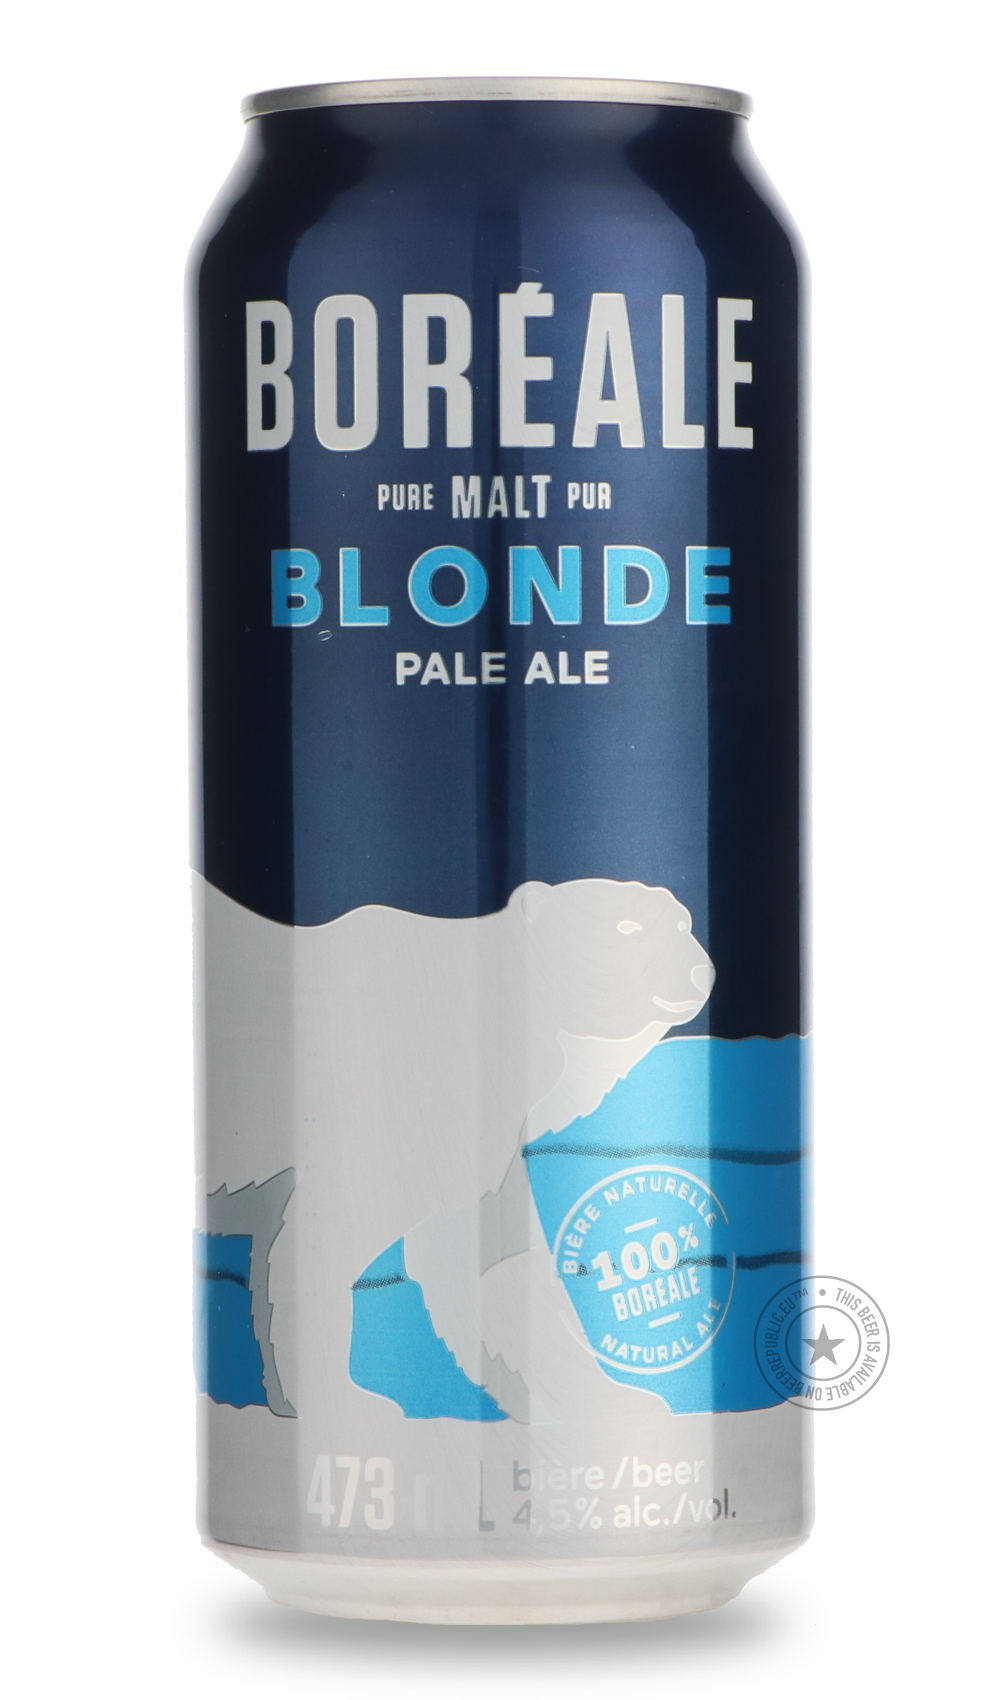 -Boréale- Blonde-Pale- Only @ Beer Republic - The best online beer store for American & Canadian craft beer - Buy beer online from the USA and Canada - Bier online kopen - Amerikaans bier kopen - Craft beer store - Craft beer kopen - Amerikanisch bier kaufen - Bier online kaufen - Acheter biere online - IPA - Stout - Porter - New England IPA - Hazy IPA - Imperial Stout - Barrel Aged - Barrel Aged Imperial Stout - Brown - Dark beer - Blond - Blonde - Pilsner - Lager - Wheat - Weizen - Amber - Barley Wine - Q